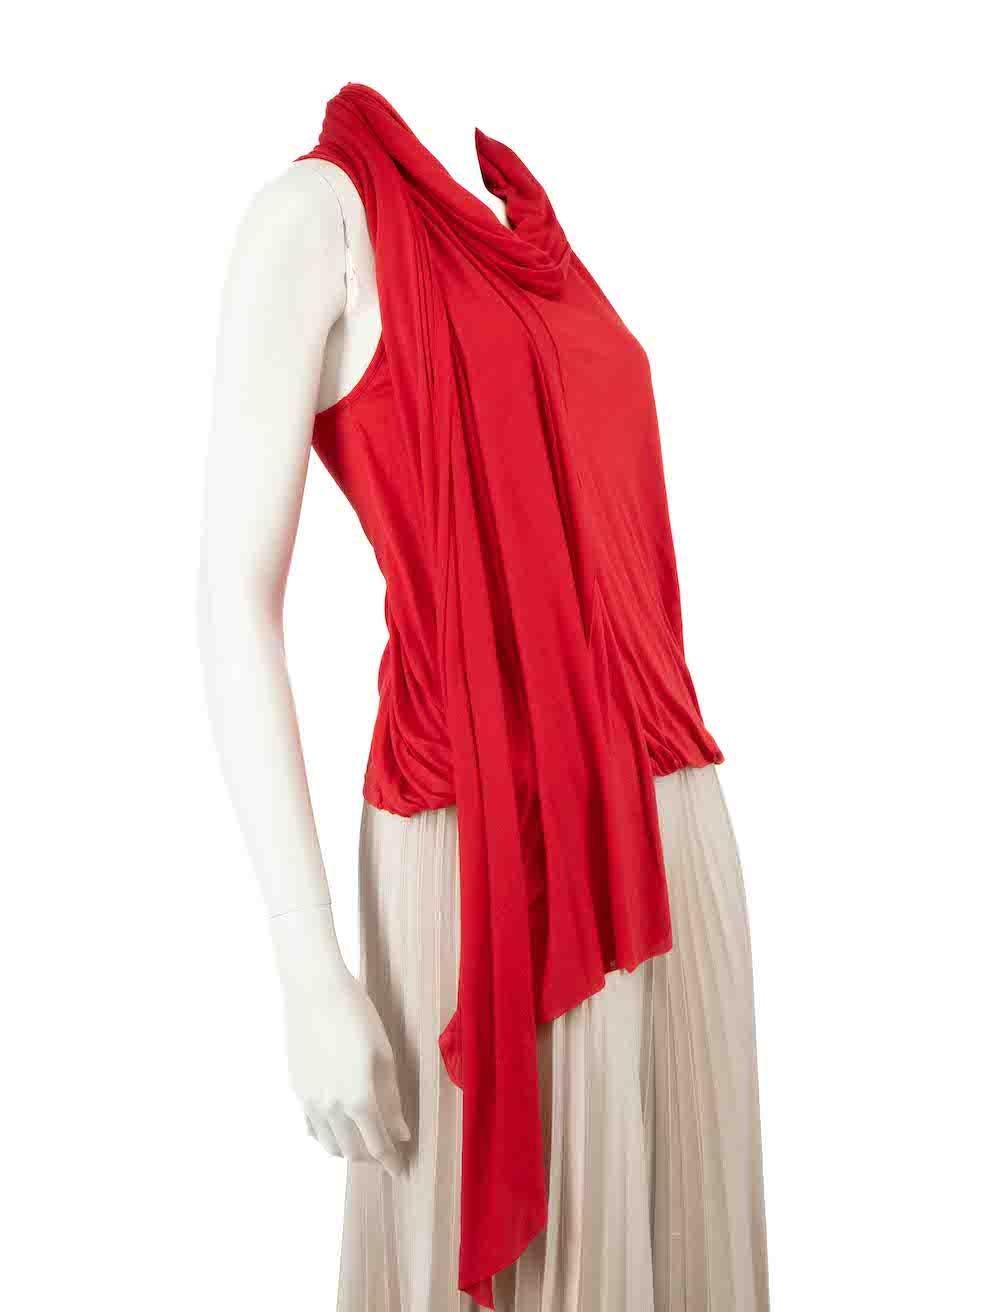 CONDITION is Good. Minor wear to top is evident. Light wear to the front and scarf detail with dark marks to the fabric on this used Alexander McQueen designer resale item.
 
Details
Red
Modal
Tank top
Draped scarf detail
Round neck
Puff hem

Made